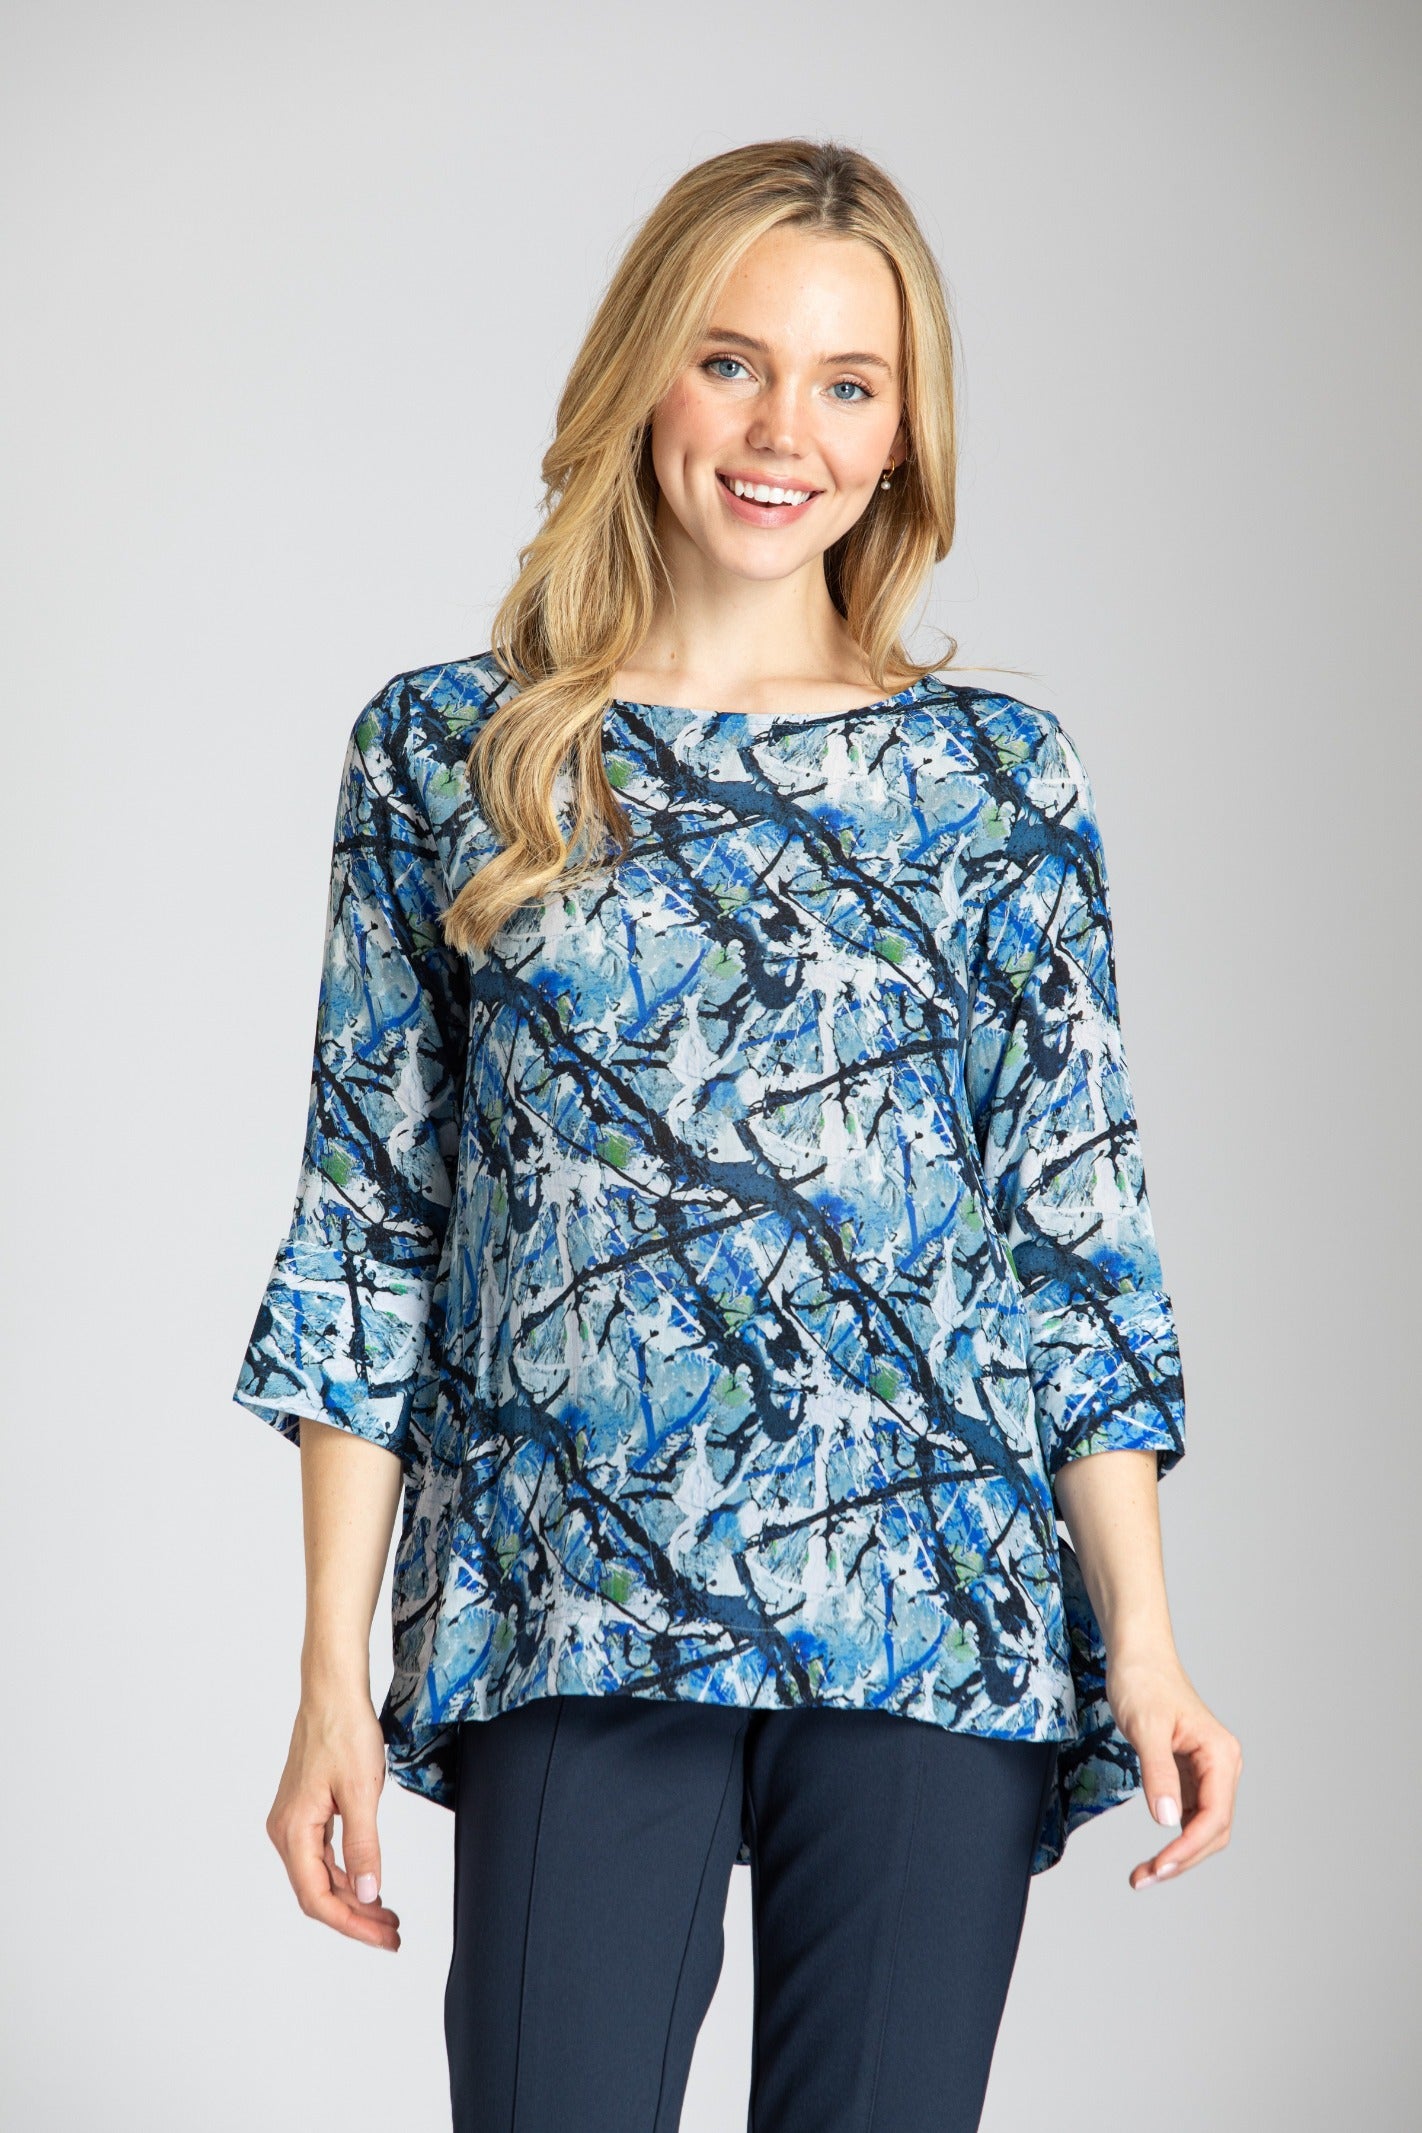 APNY Fit and Flare Tunic